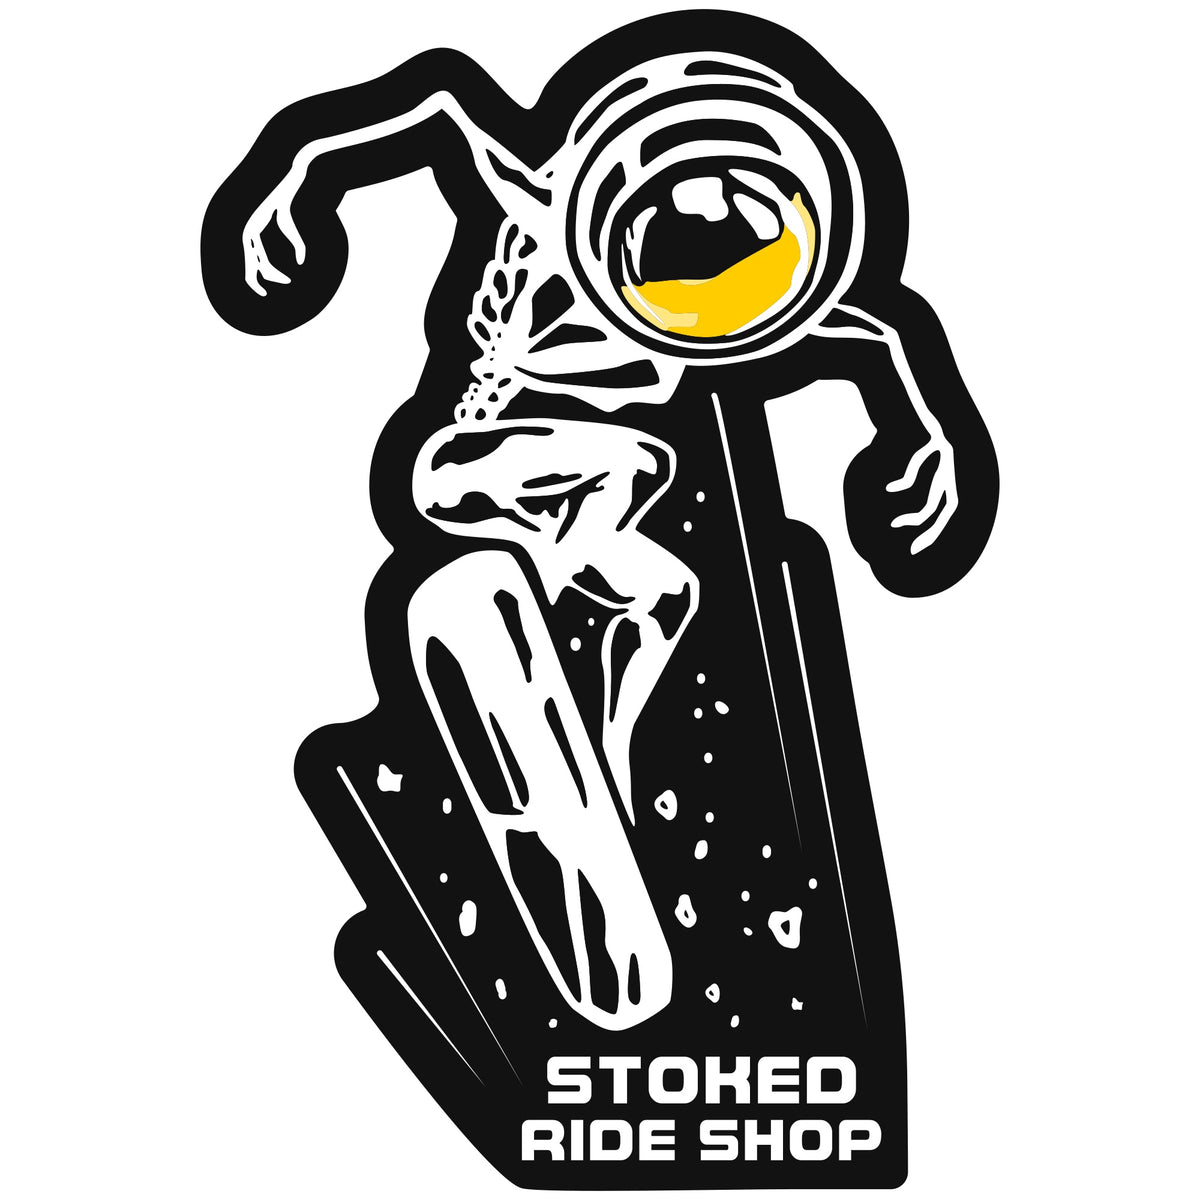 Stoked Ride Shop Space Man Sticker Series #2